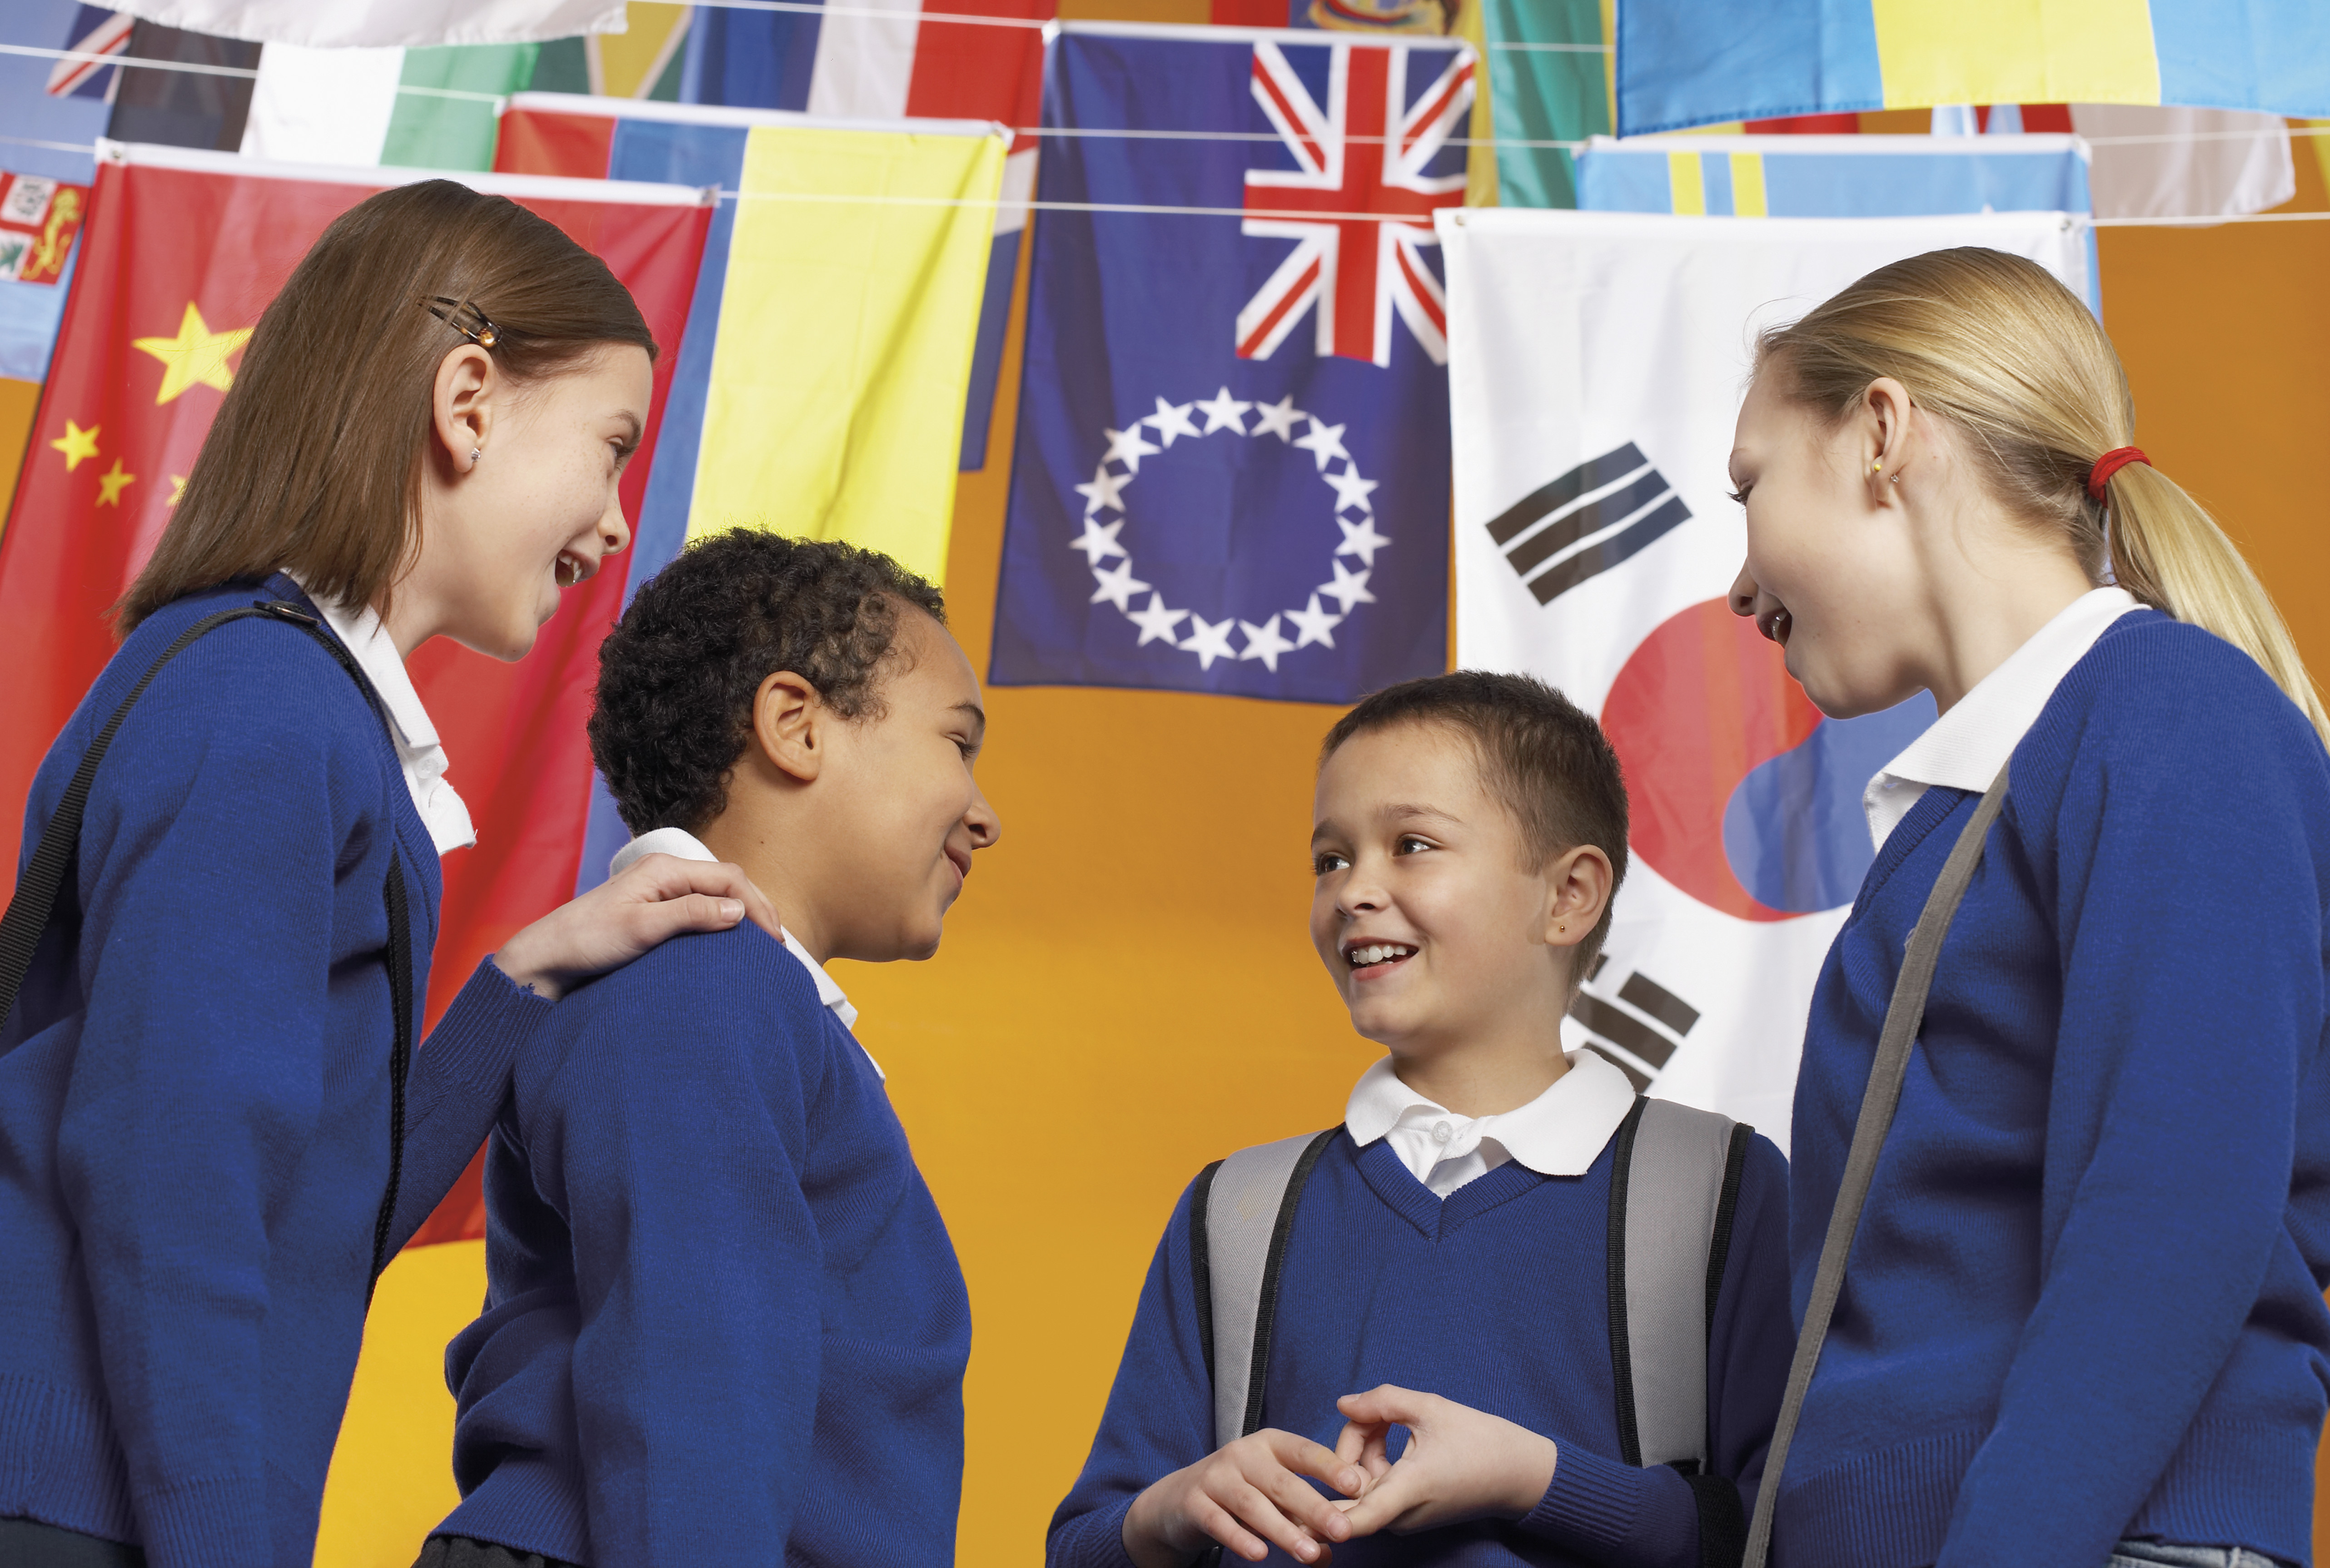 Everything a teacher needs to know about international schools